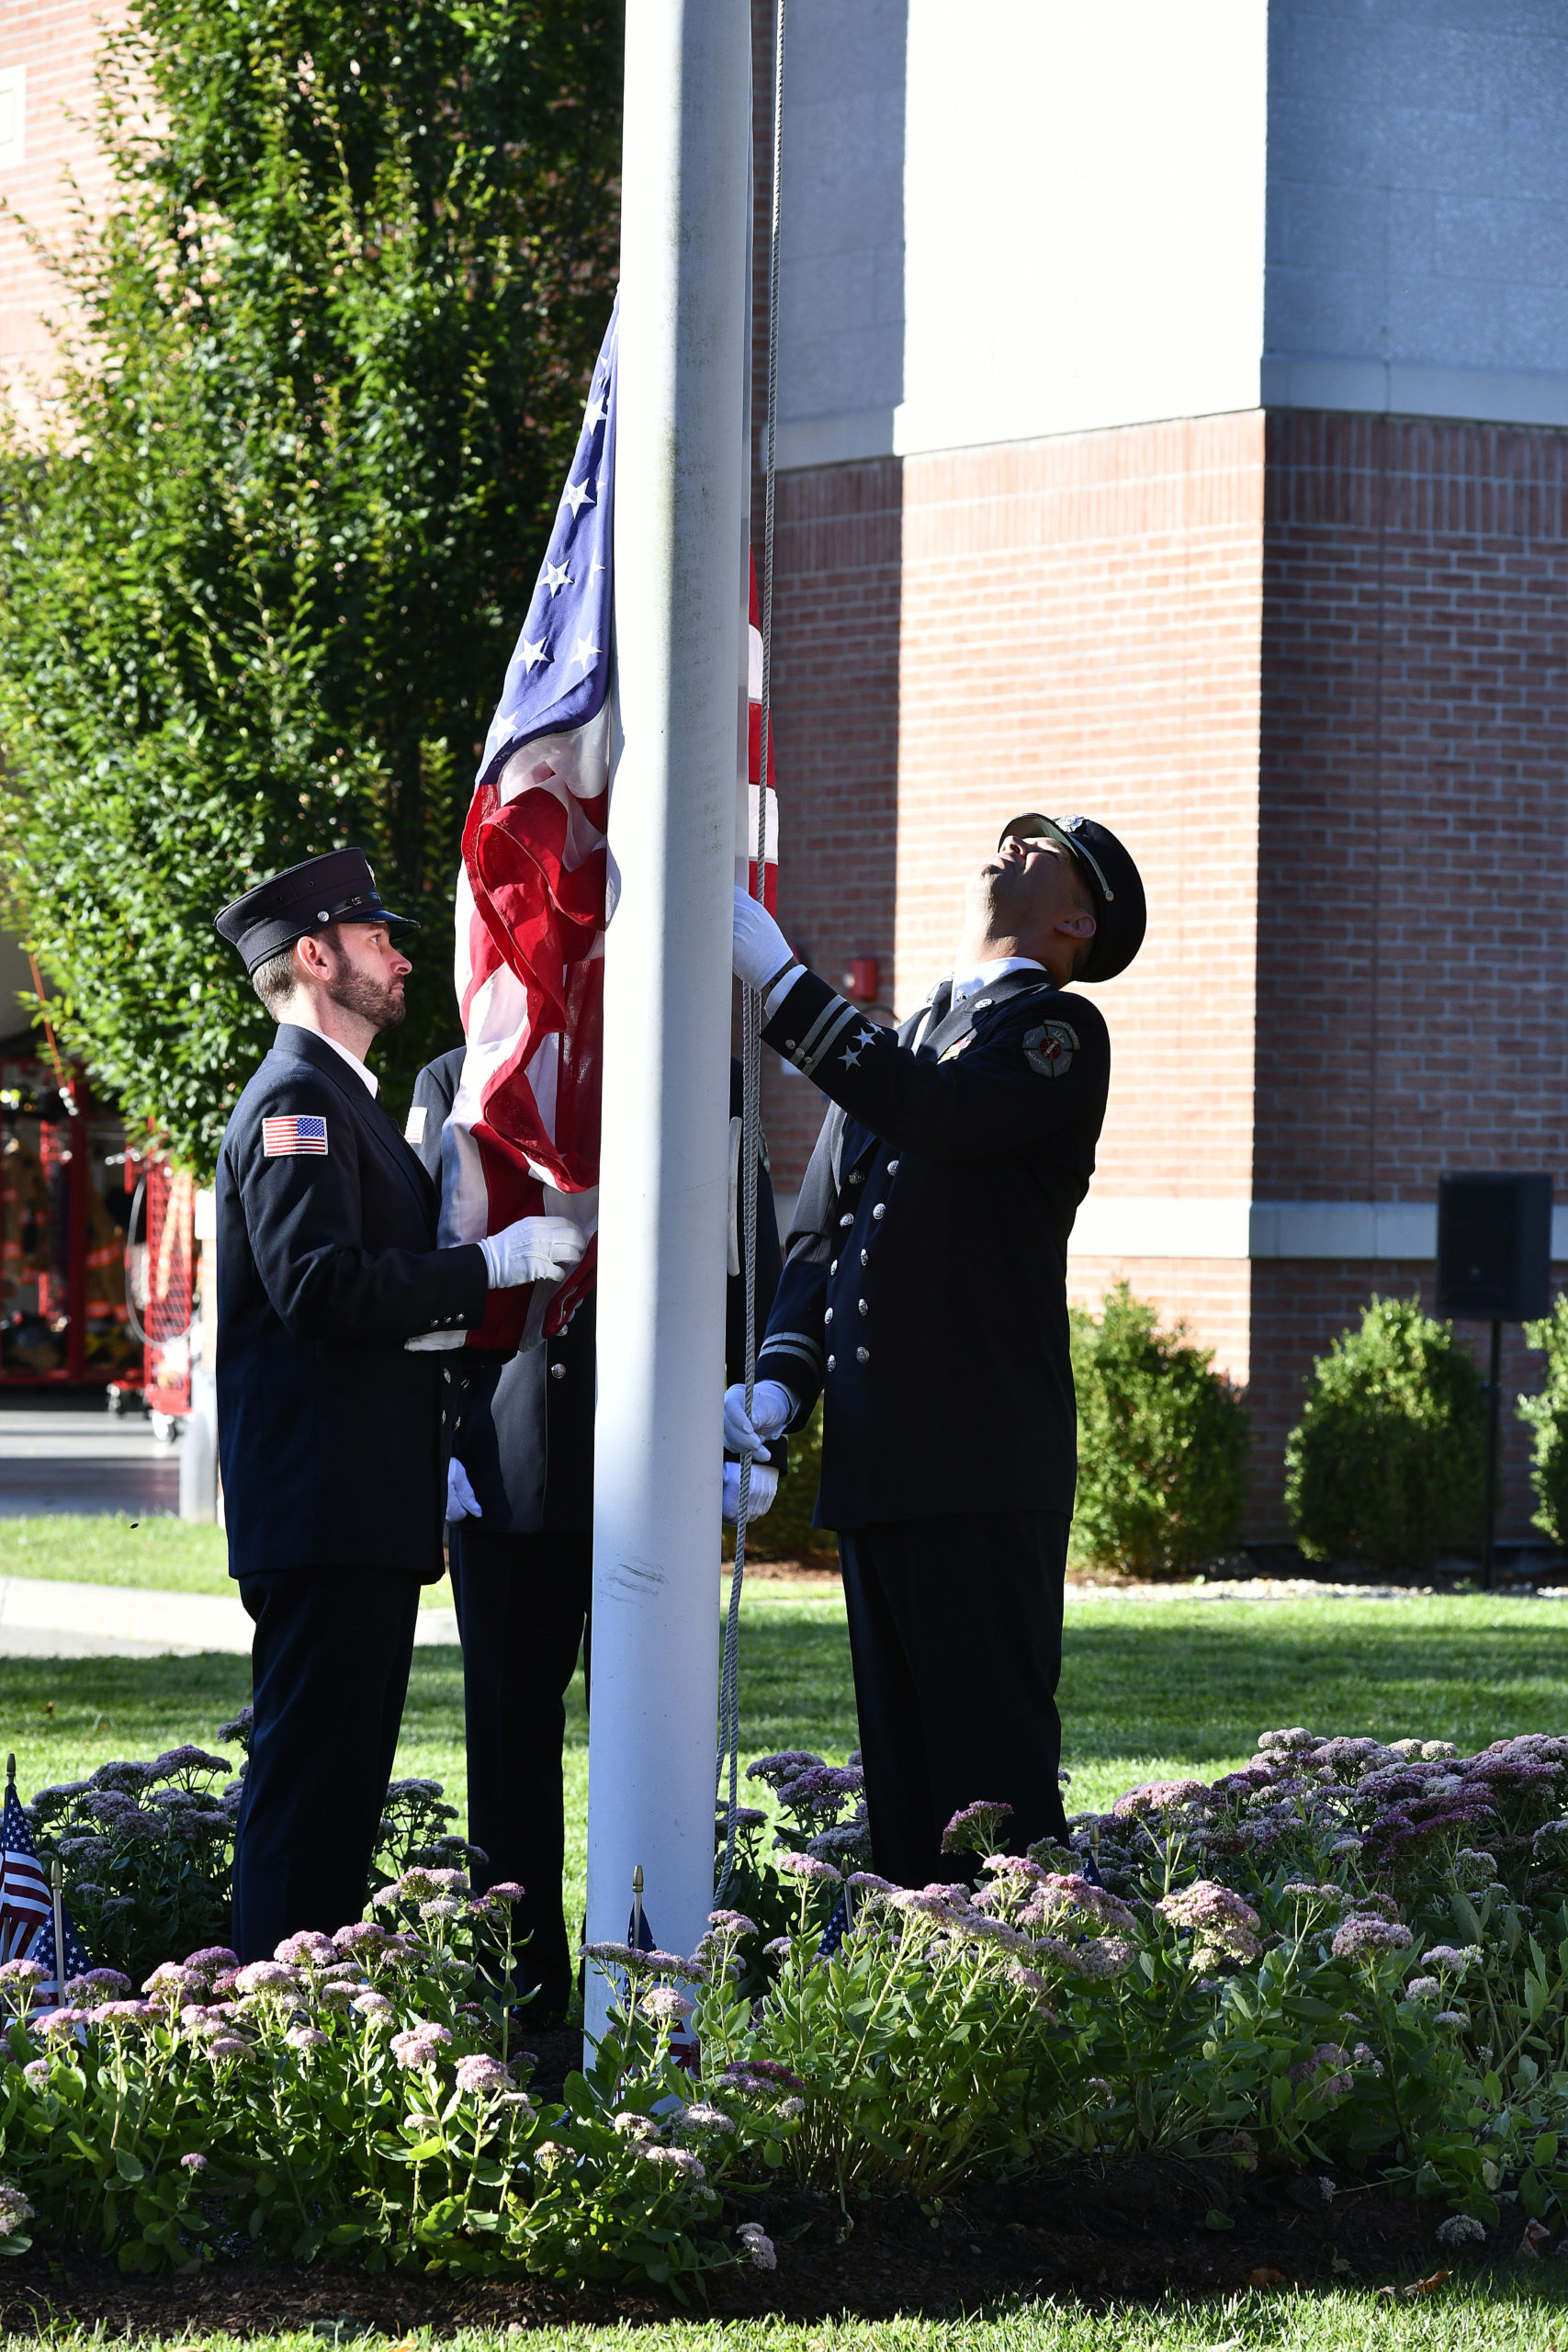 The Color Guard presents and raises the flag at the Southampton Fire Department ceremony on Saturday.